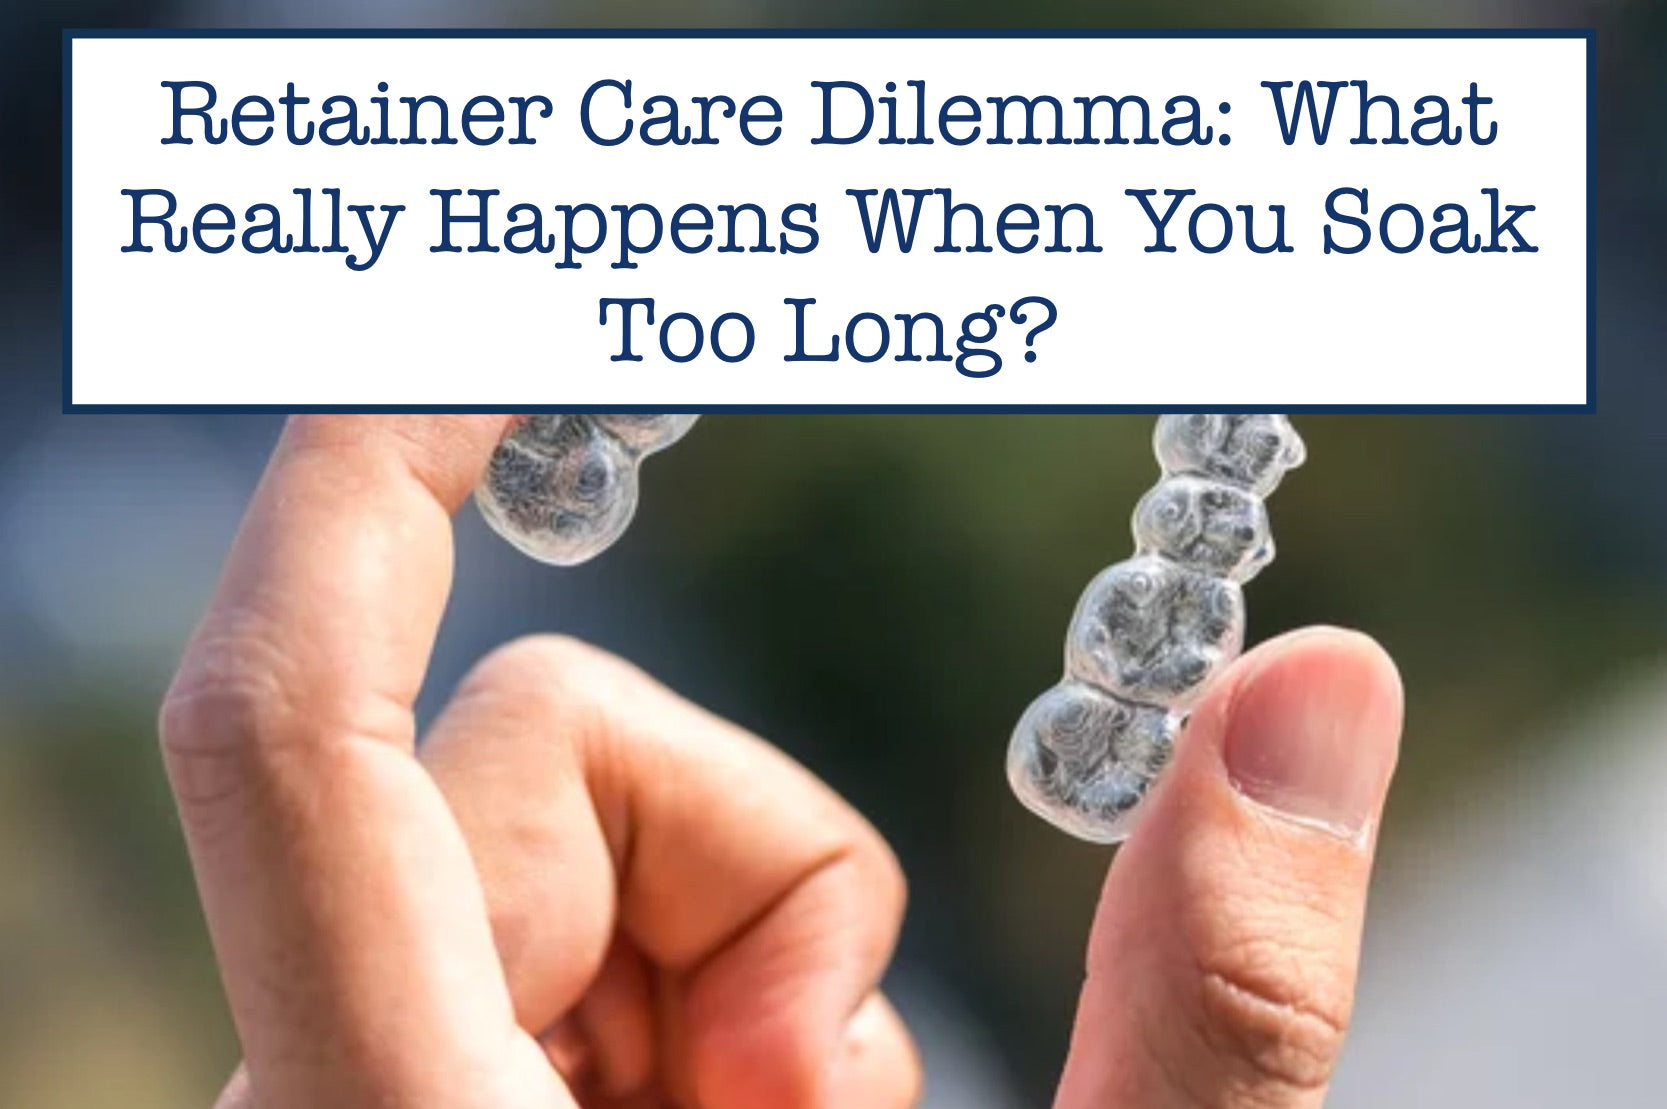 Retainer Care Dilemma: What Really Happens When You Soak Too Long?